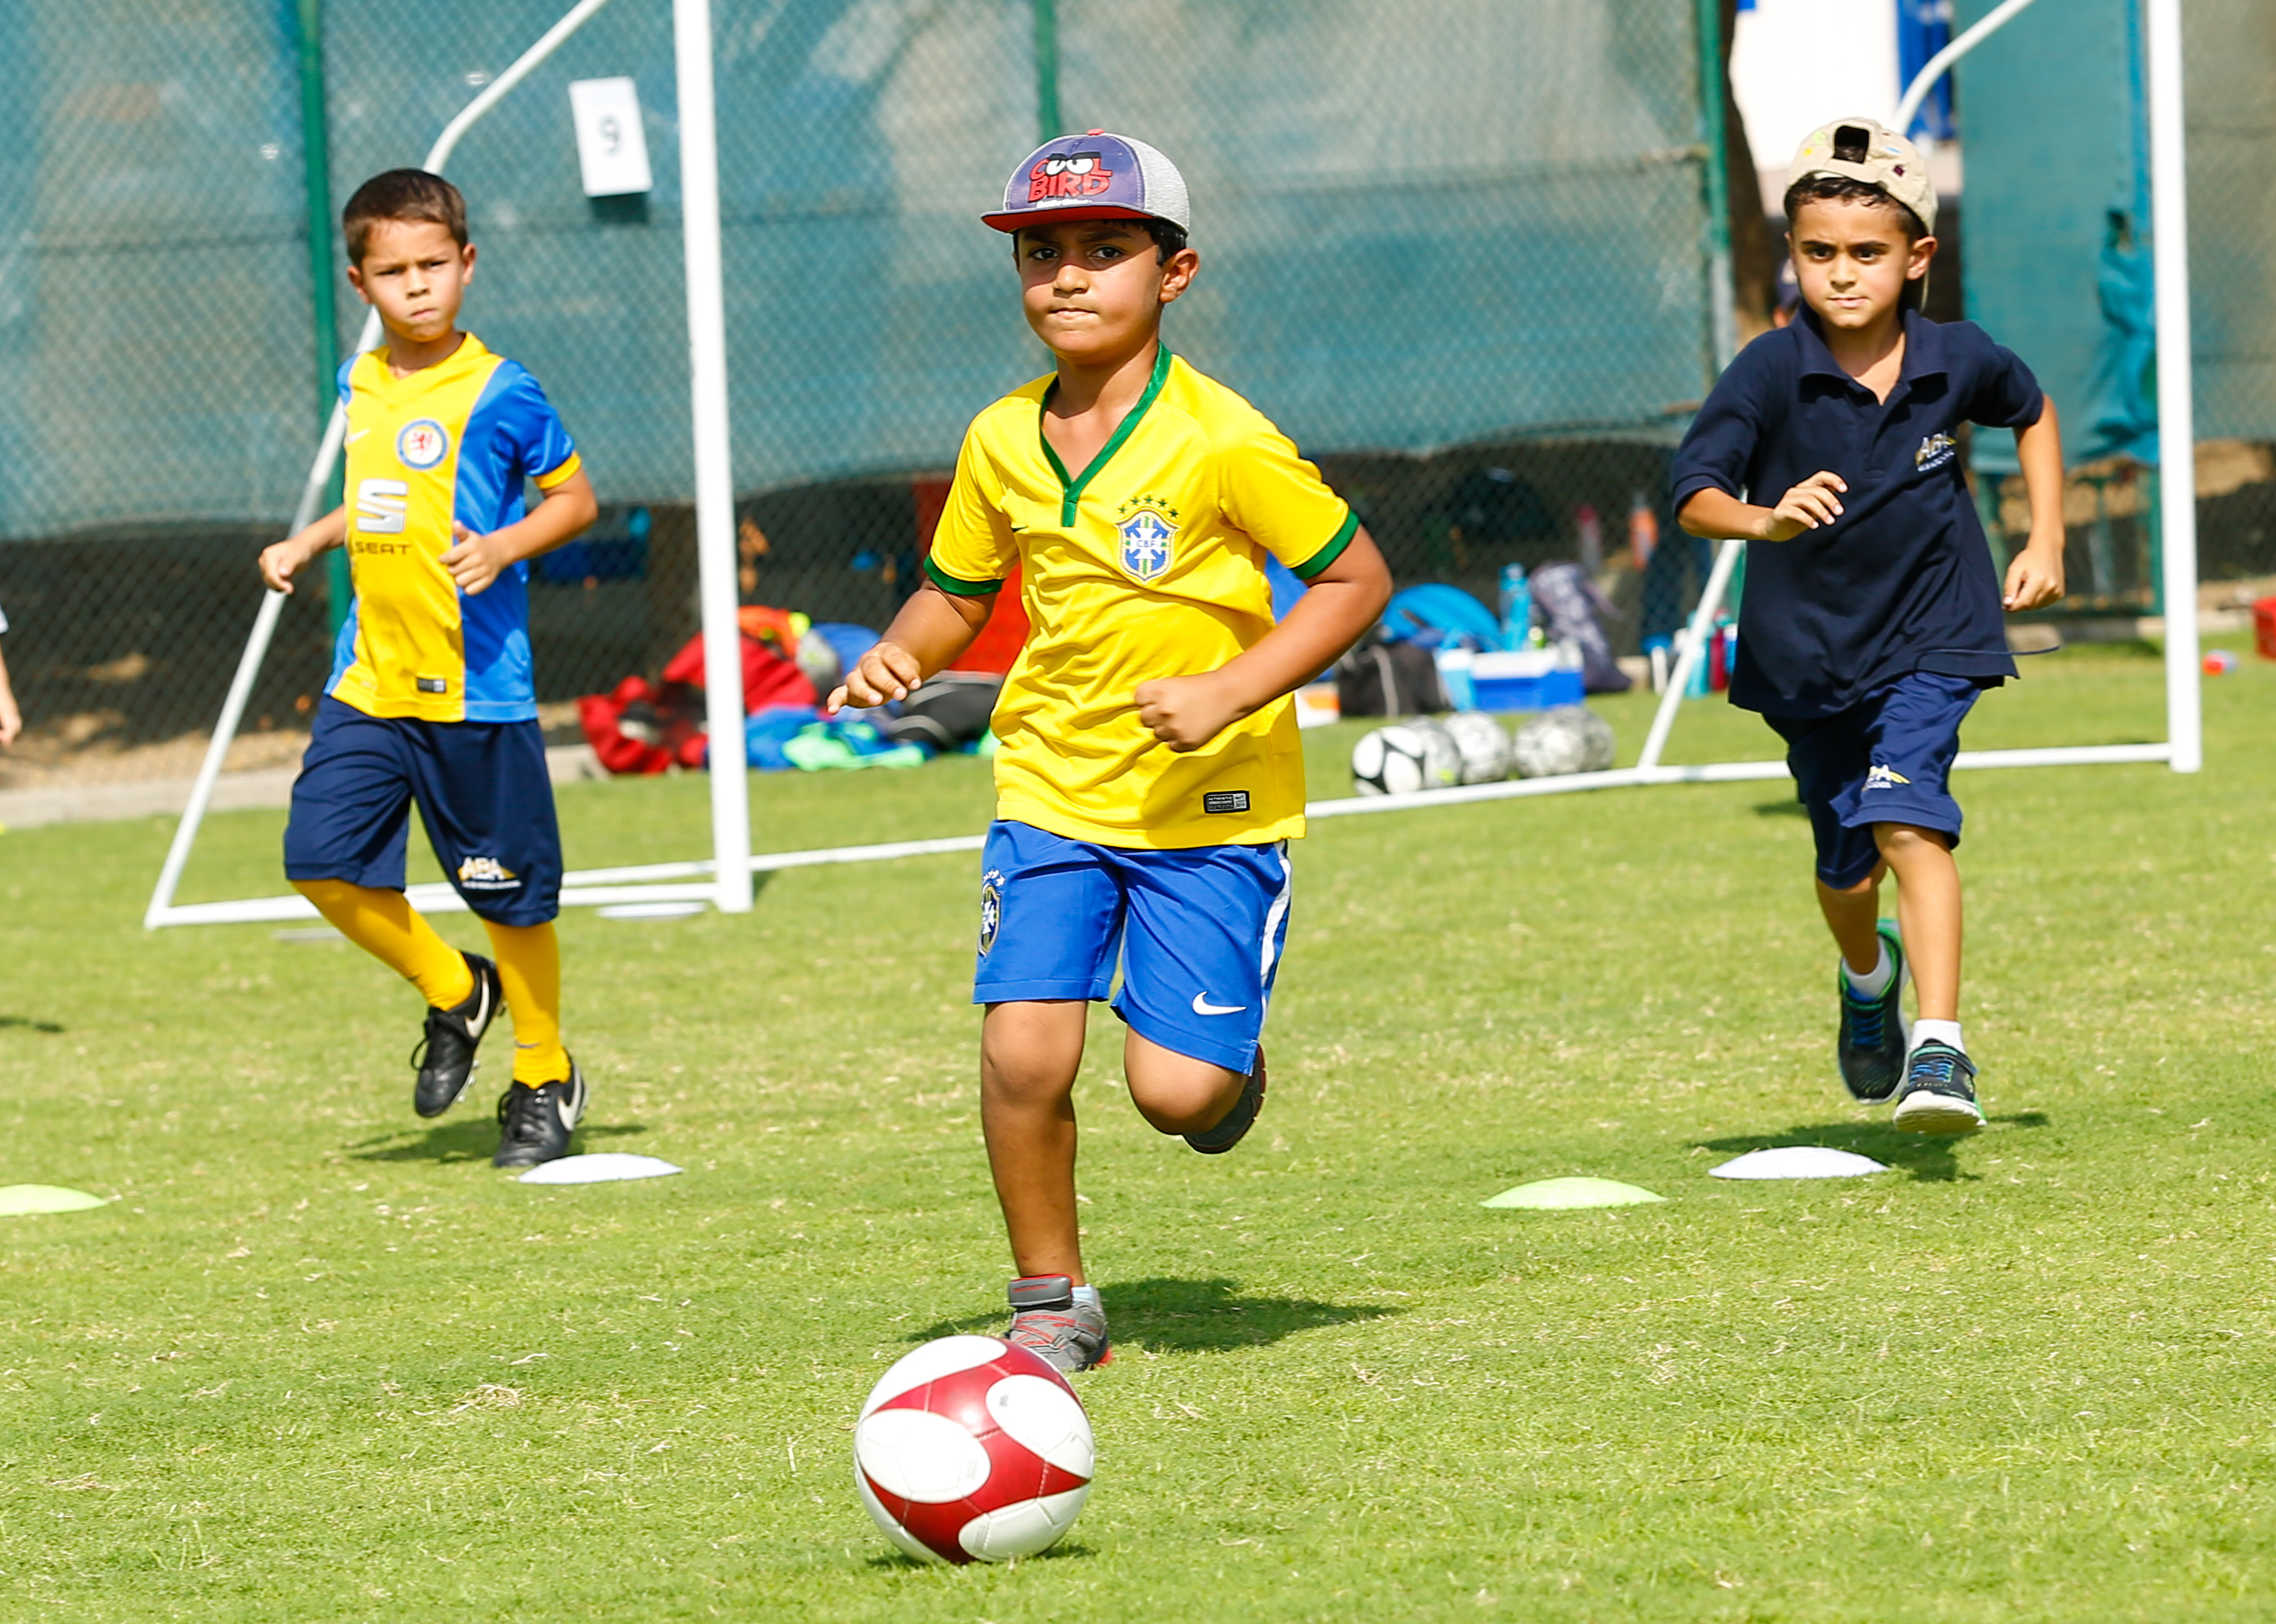 Muscat Football Academy for young players in Oman